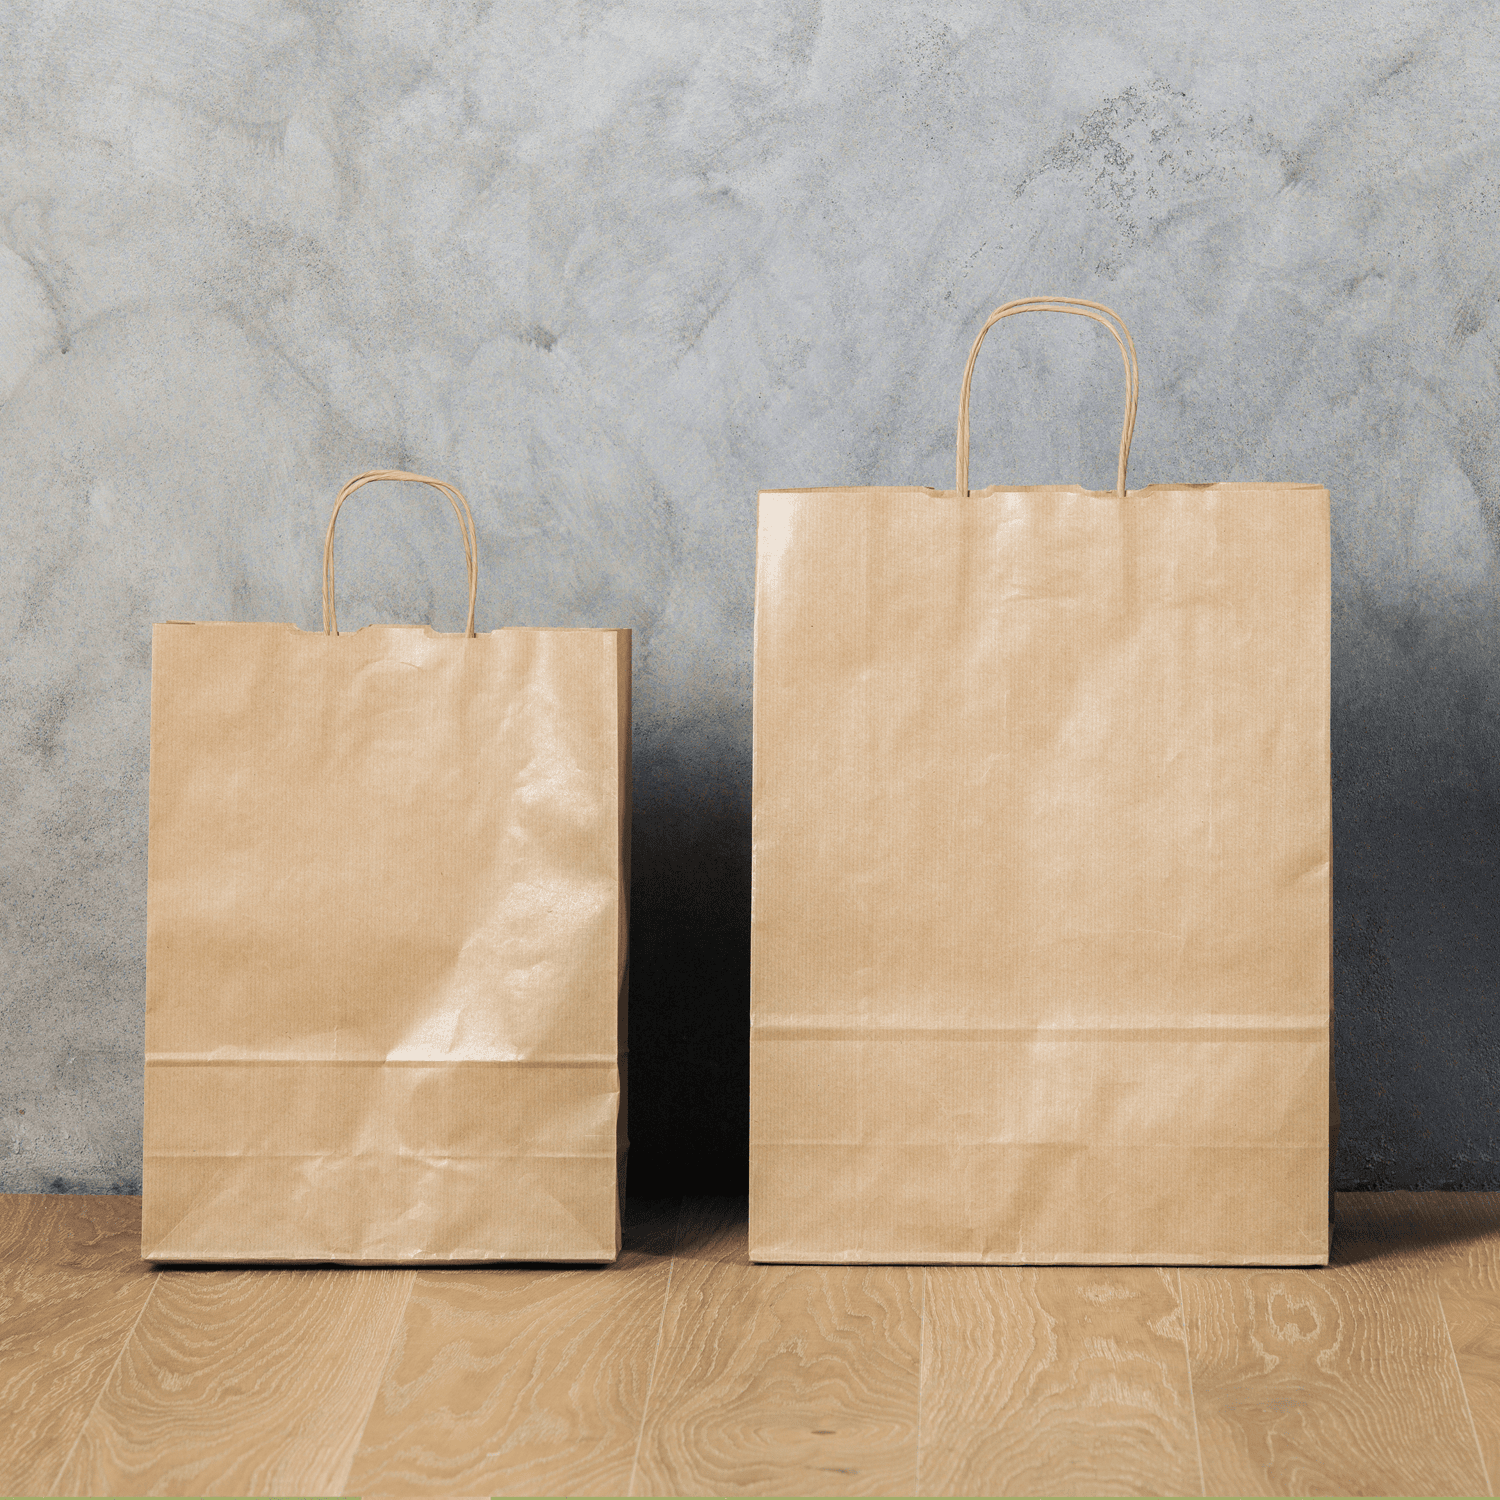 Uses for brown paper bags